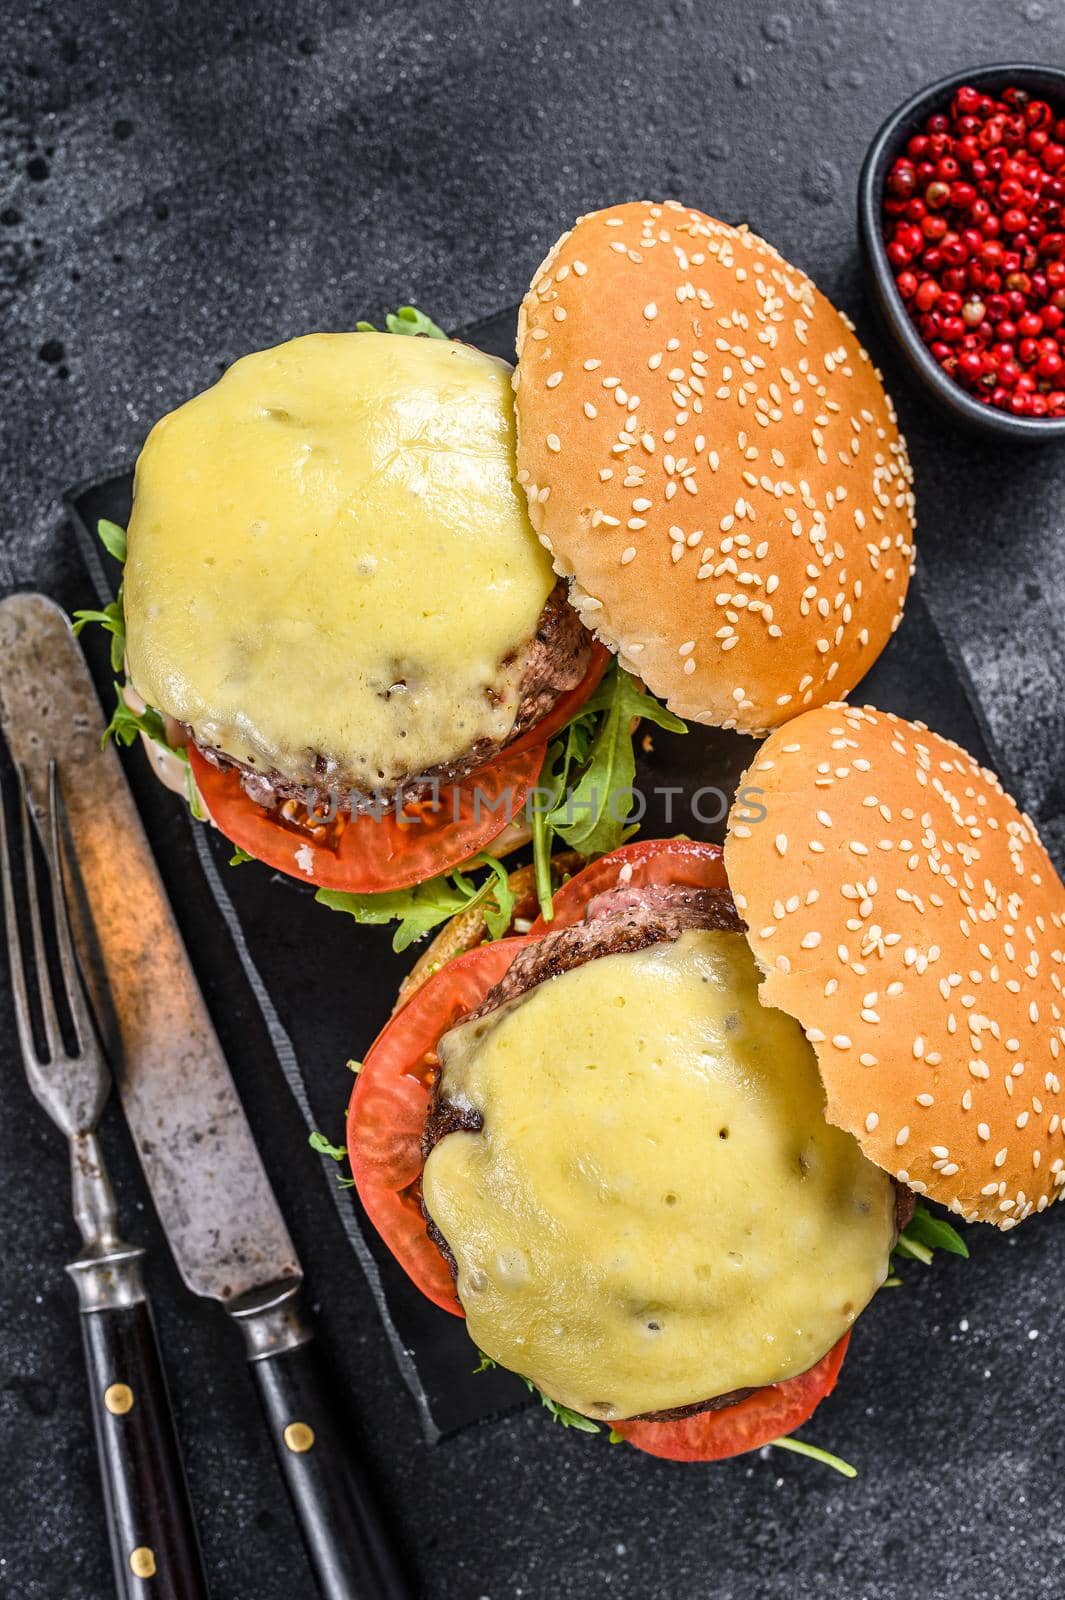 Grilled homemade burgers with beef, tomato, cheese, cucumber and lettuce. Black background. Top view.